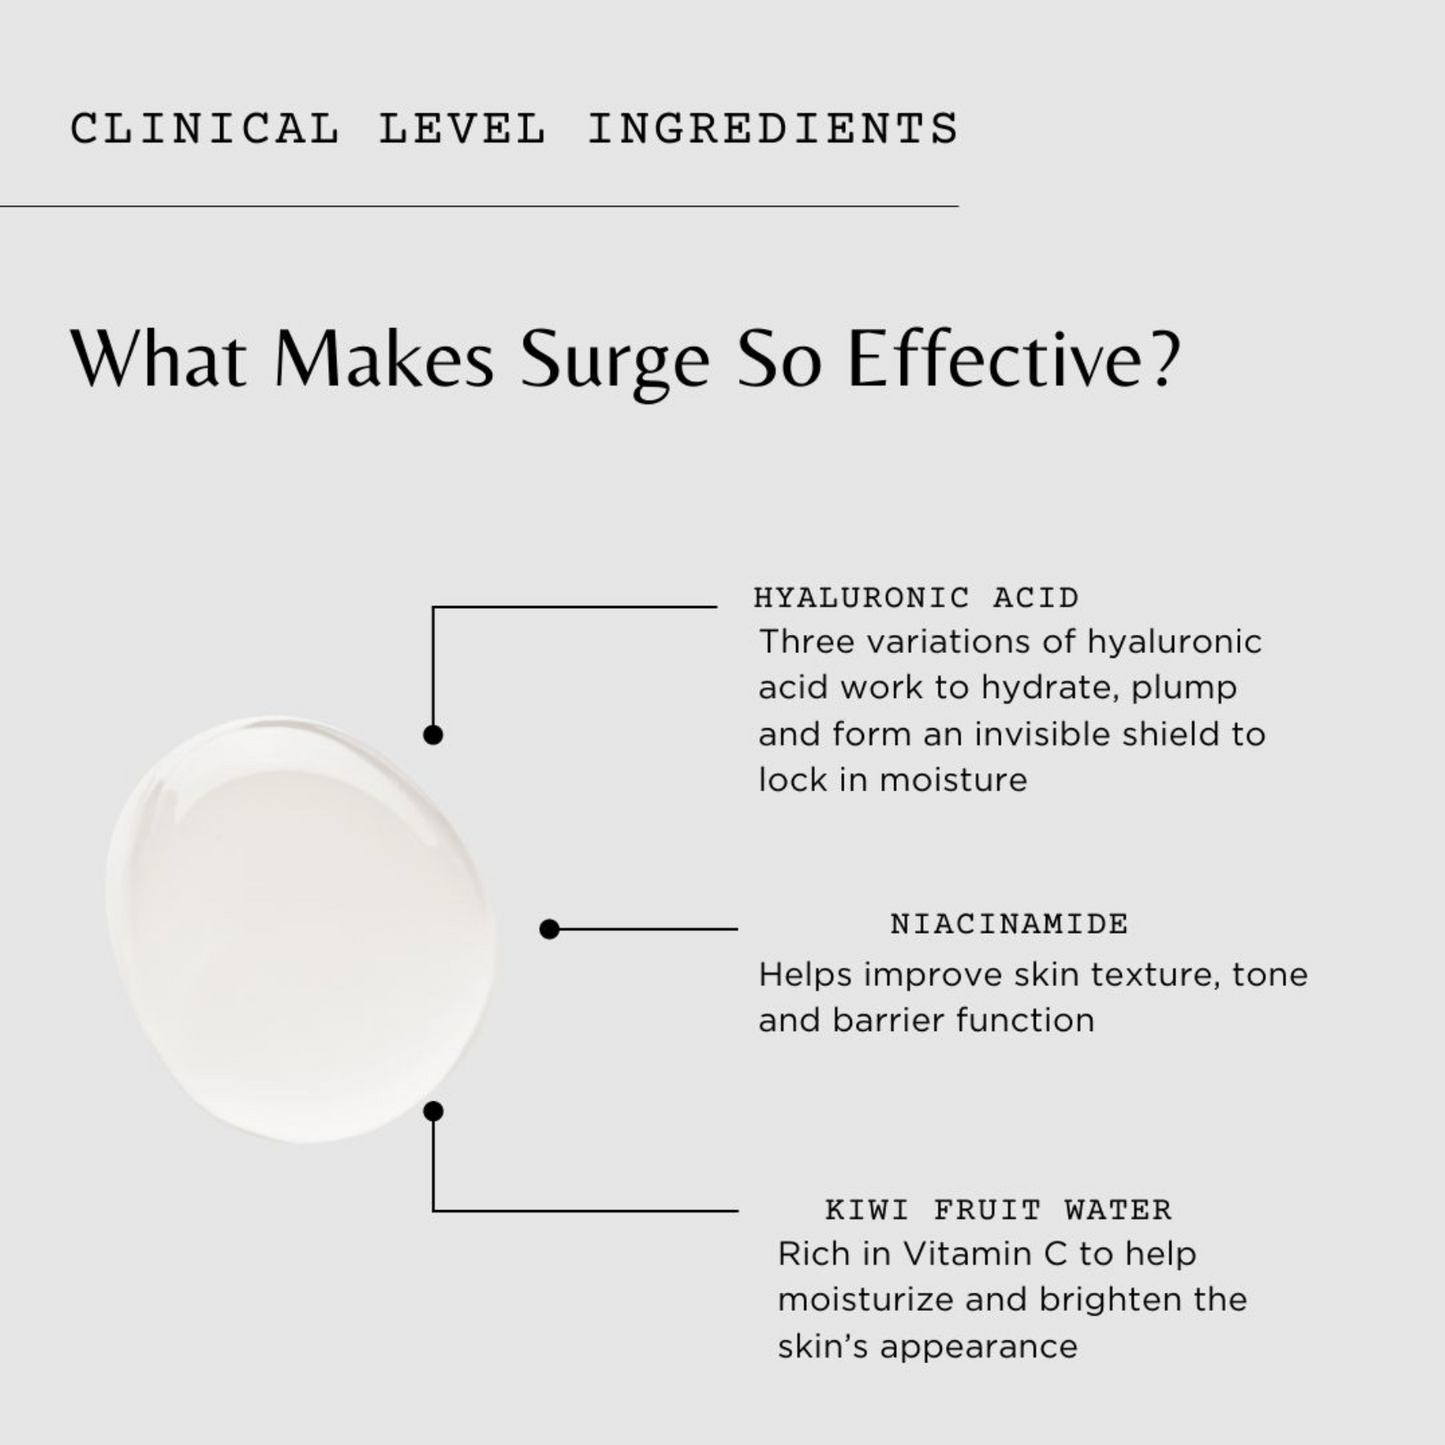 Surge Hyaluronic Acid Booster